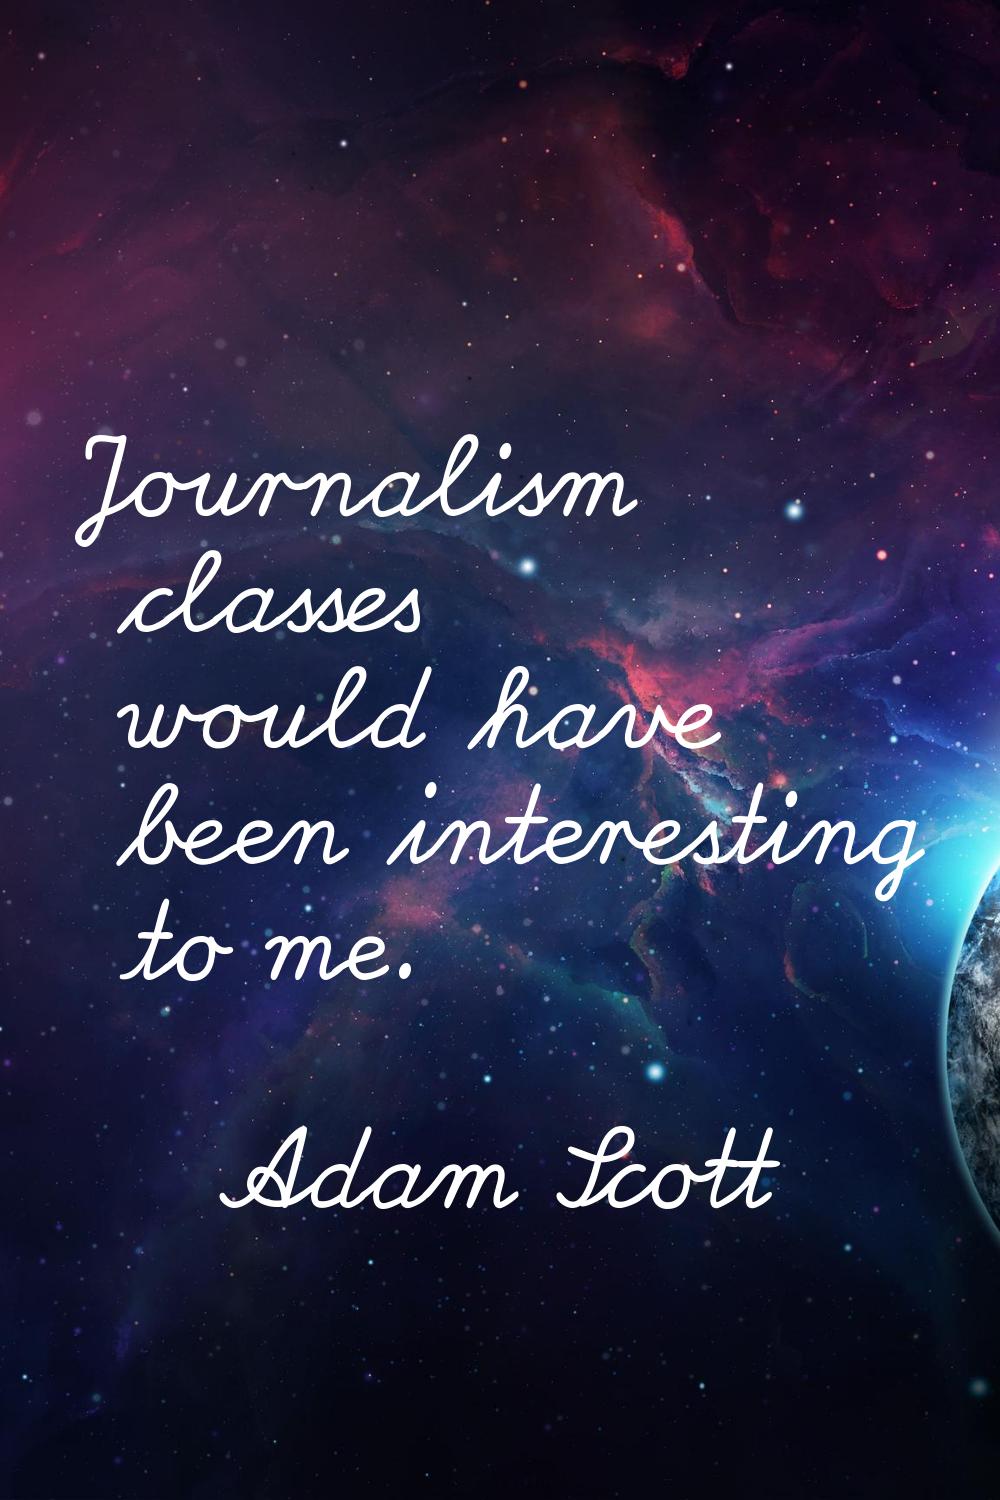 Journalism classes would have been interesting to me.